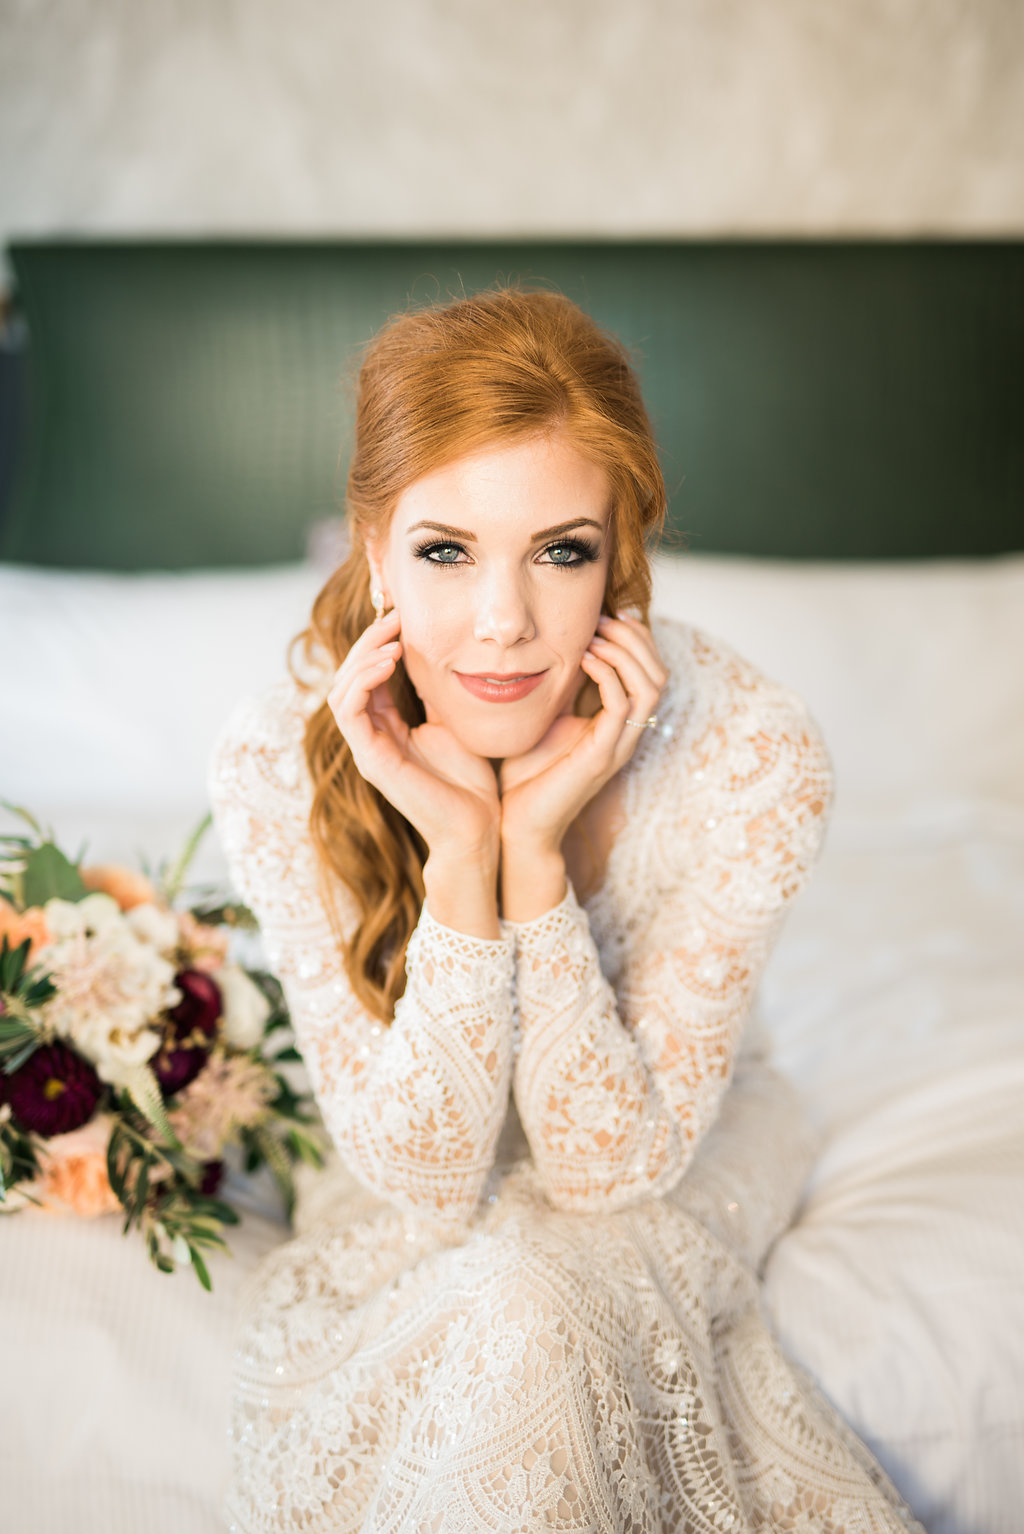 Off-White Lace Long Sleeve Vintage Inspired Bridal Portrait, with Organic Bouquet | Naples Wedding Photographer Kera Photography